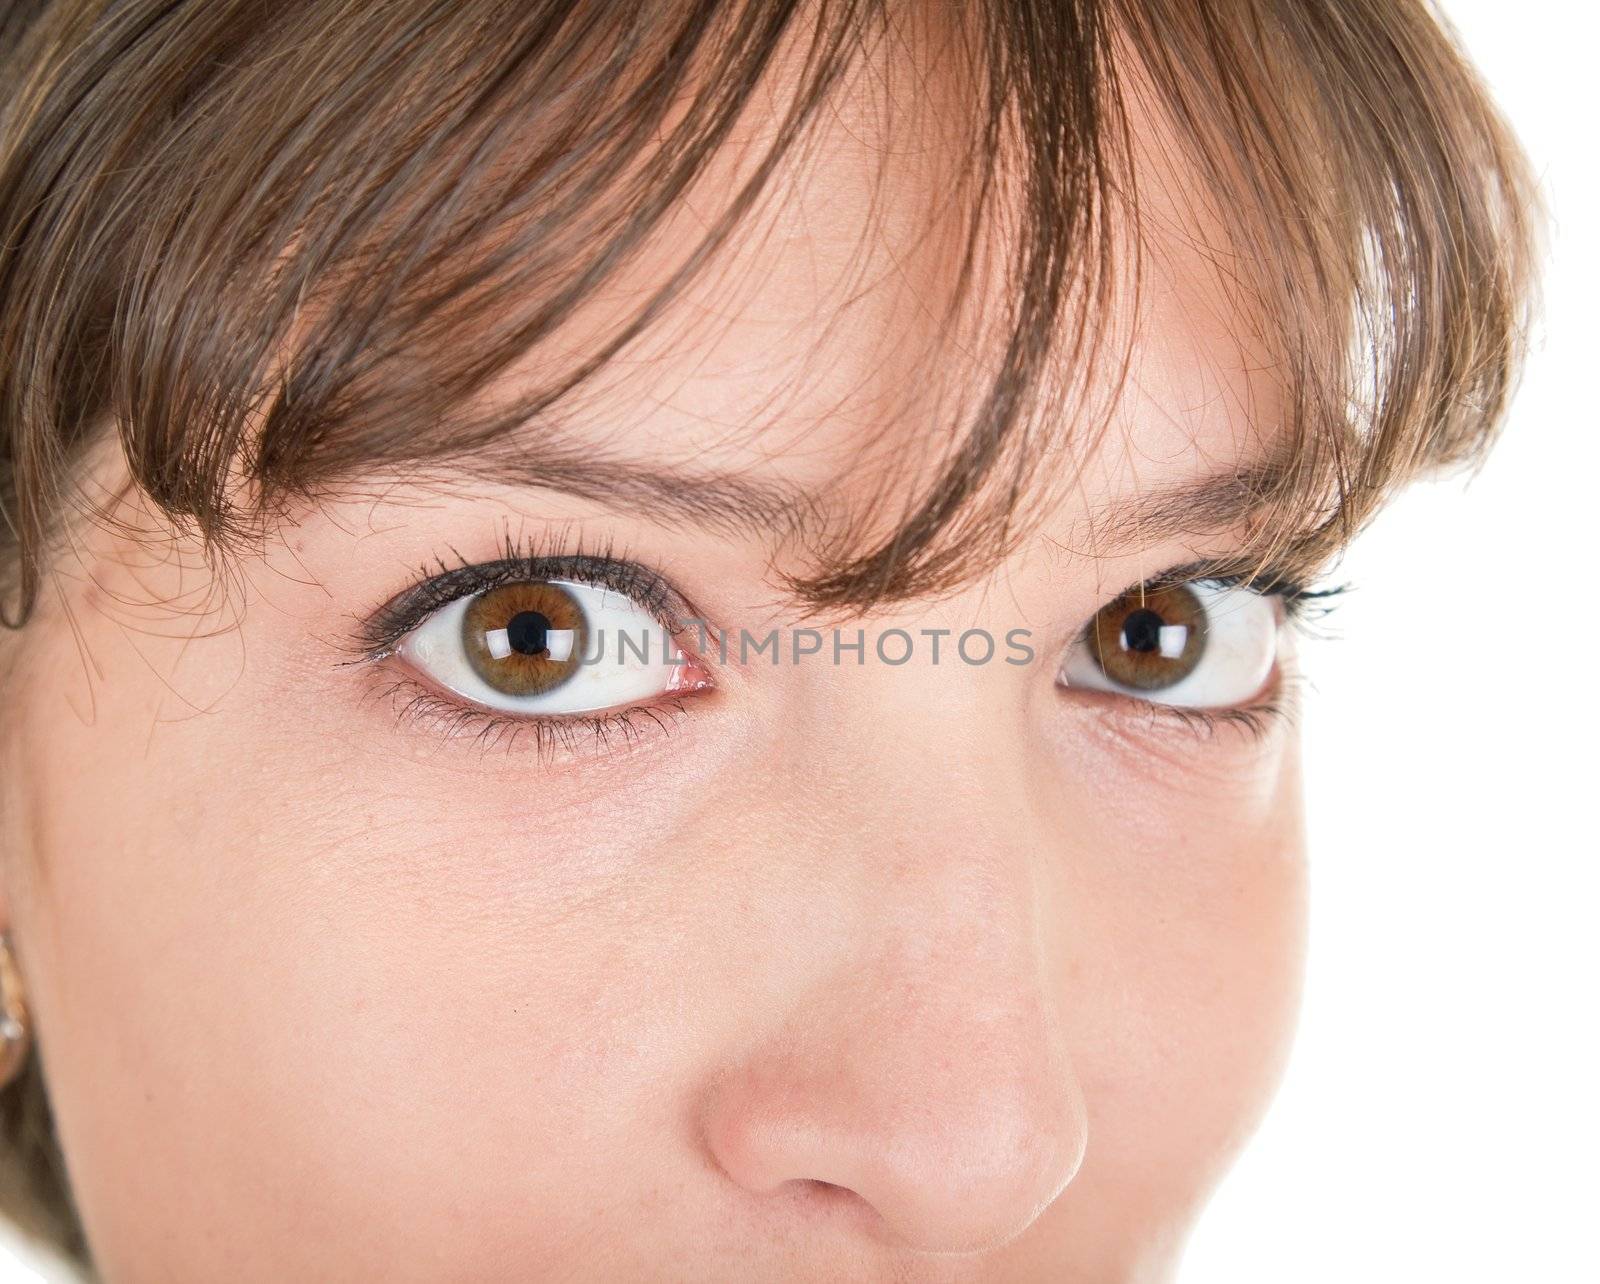 women's expressive sexy eyes very close up